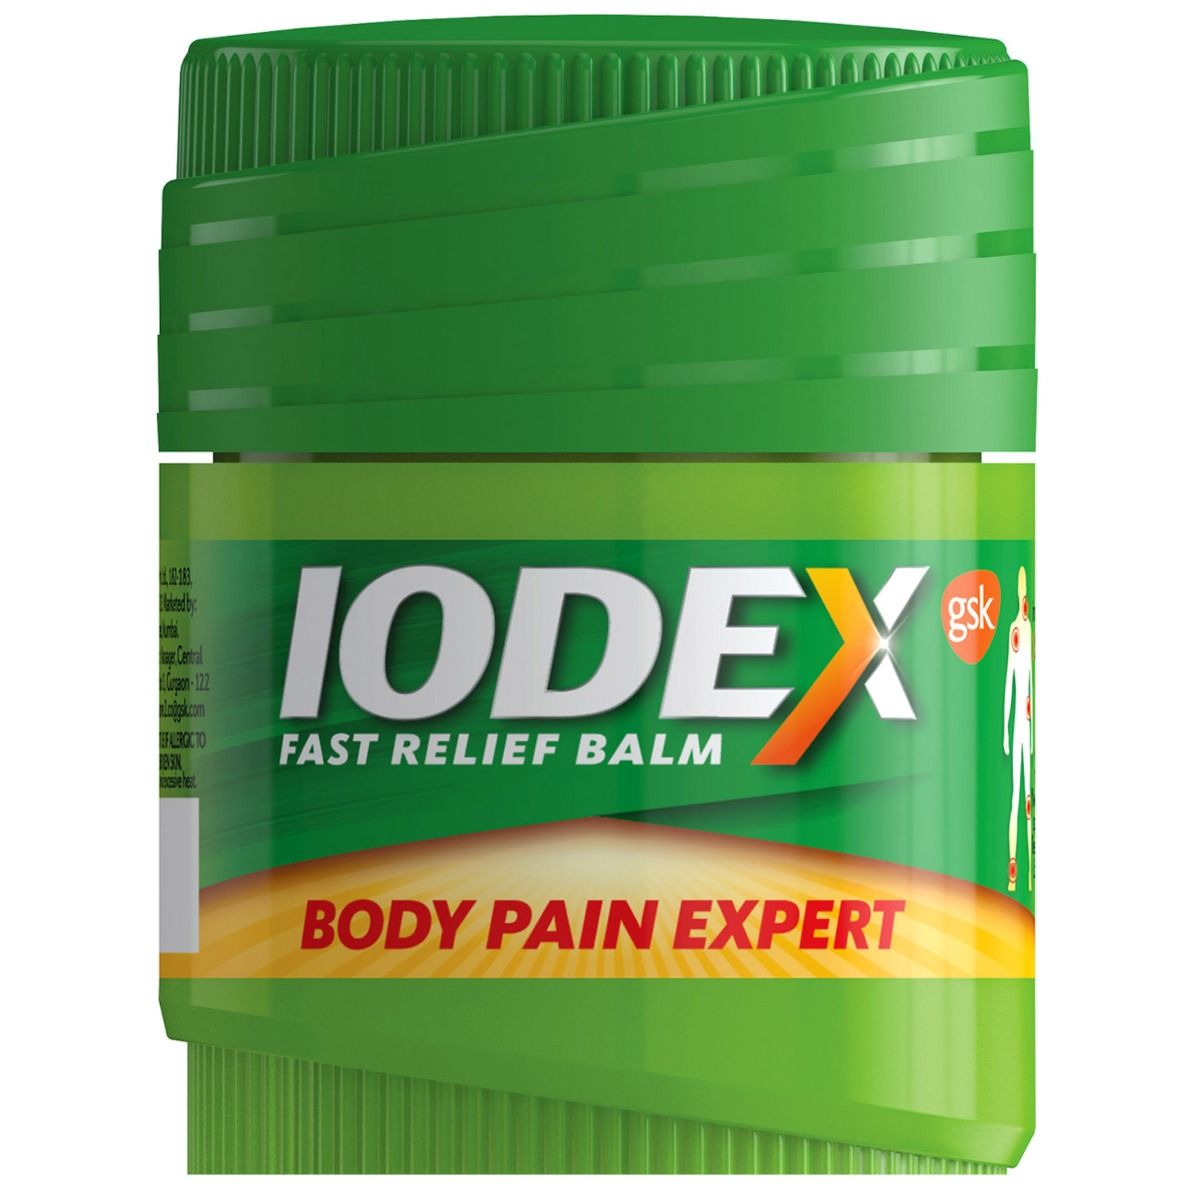 Iodex Fast Relief Balm, 16 gm, Pack of 1 